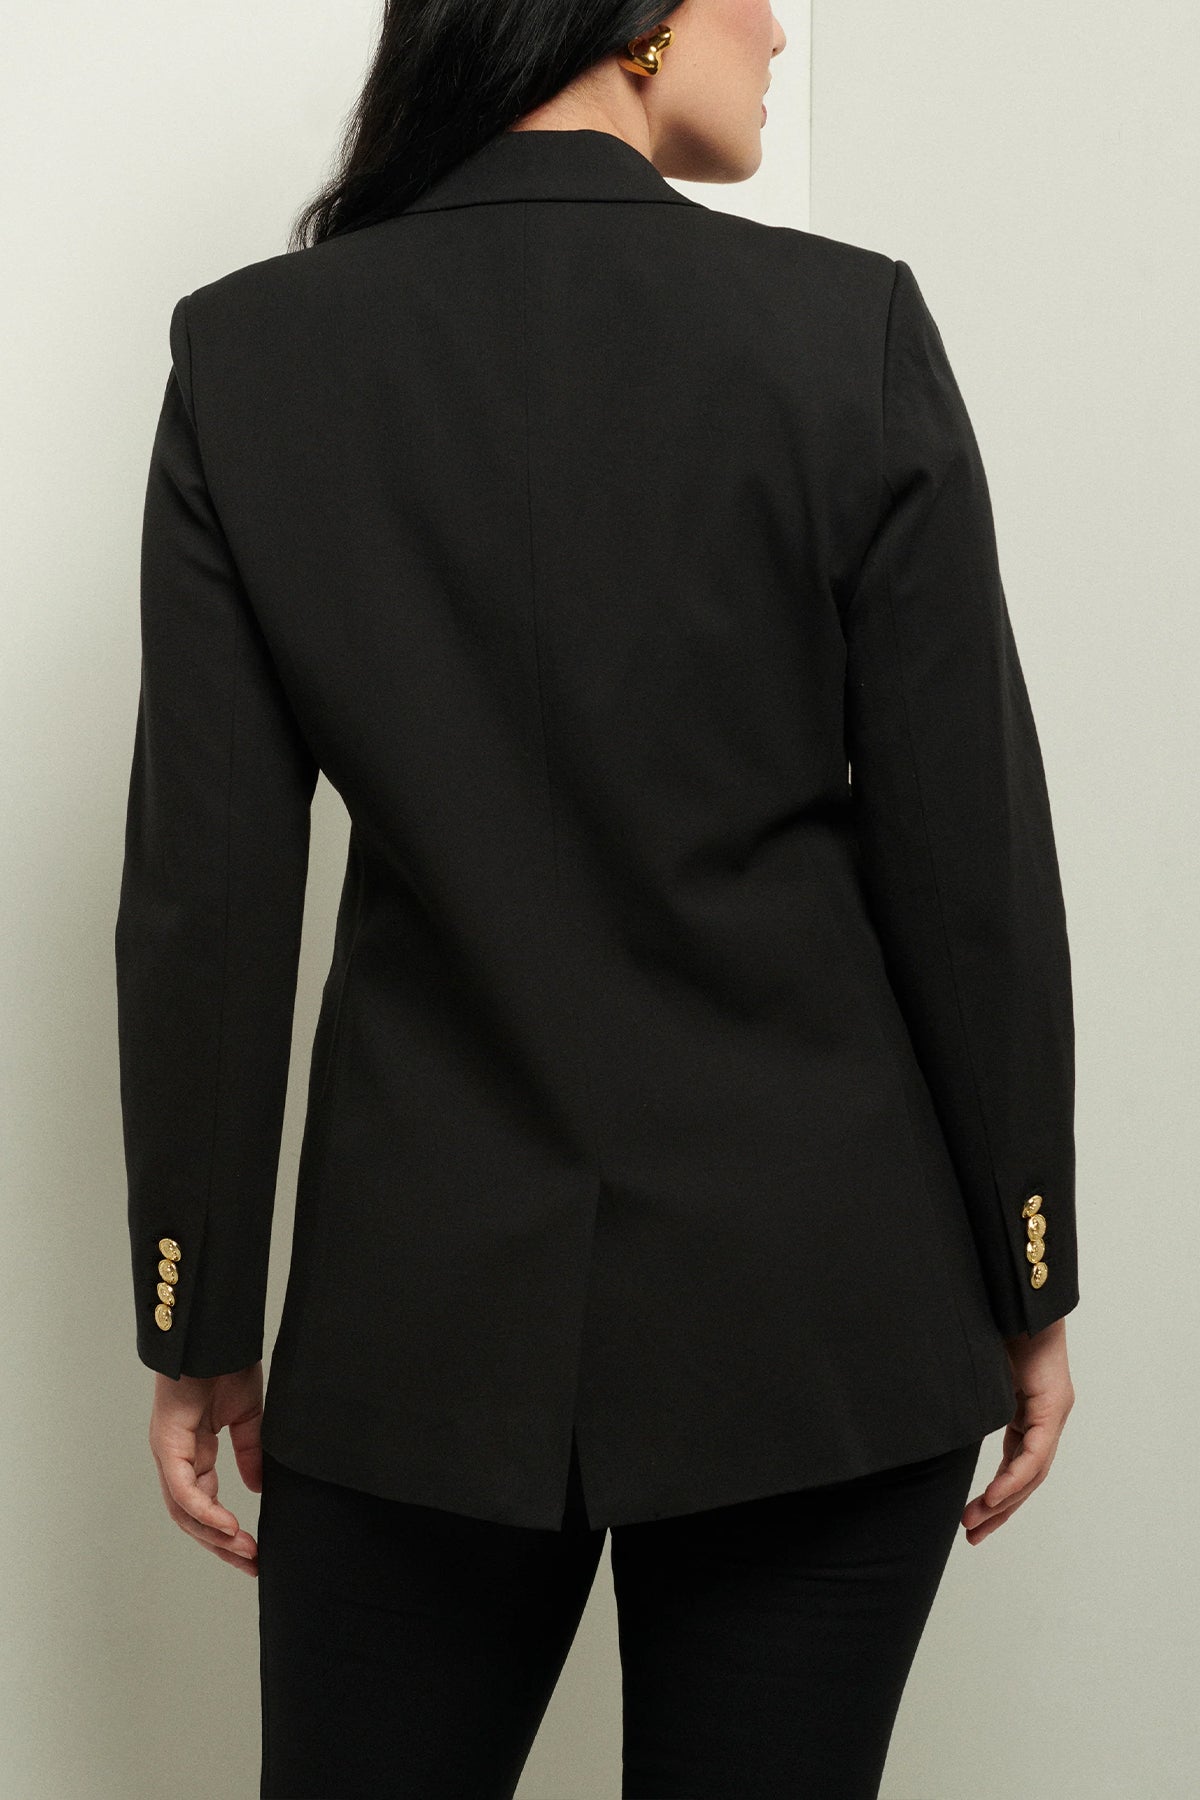 Walter Double-Breasted Jacket in Black - shop-olivia.com